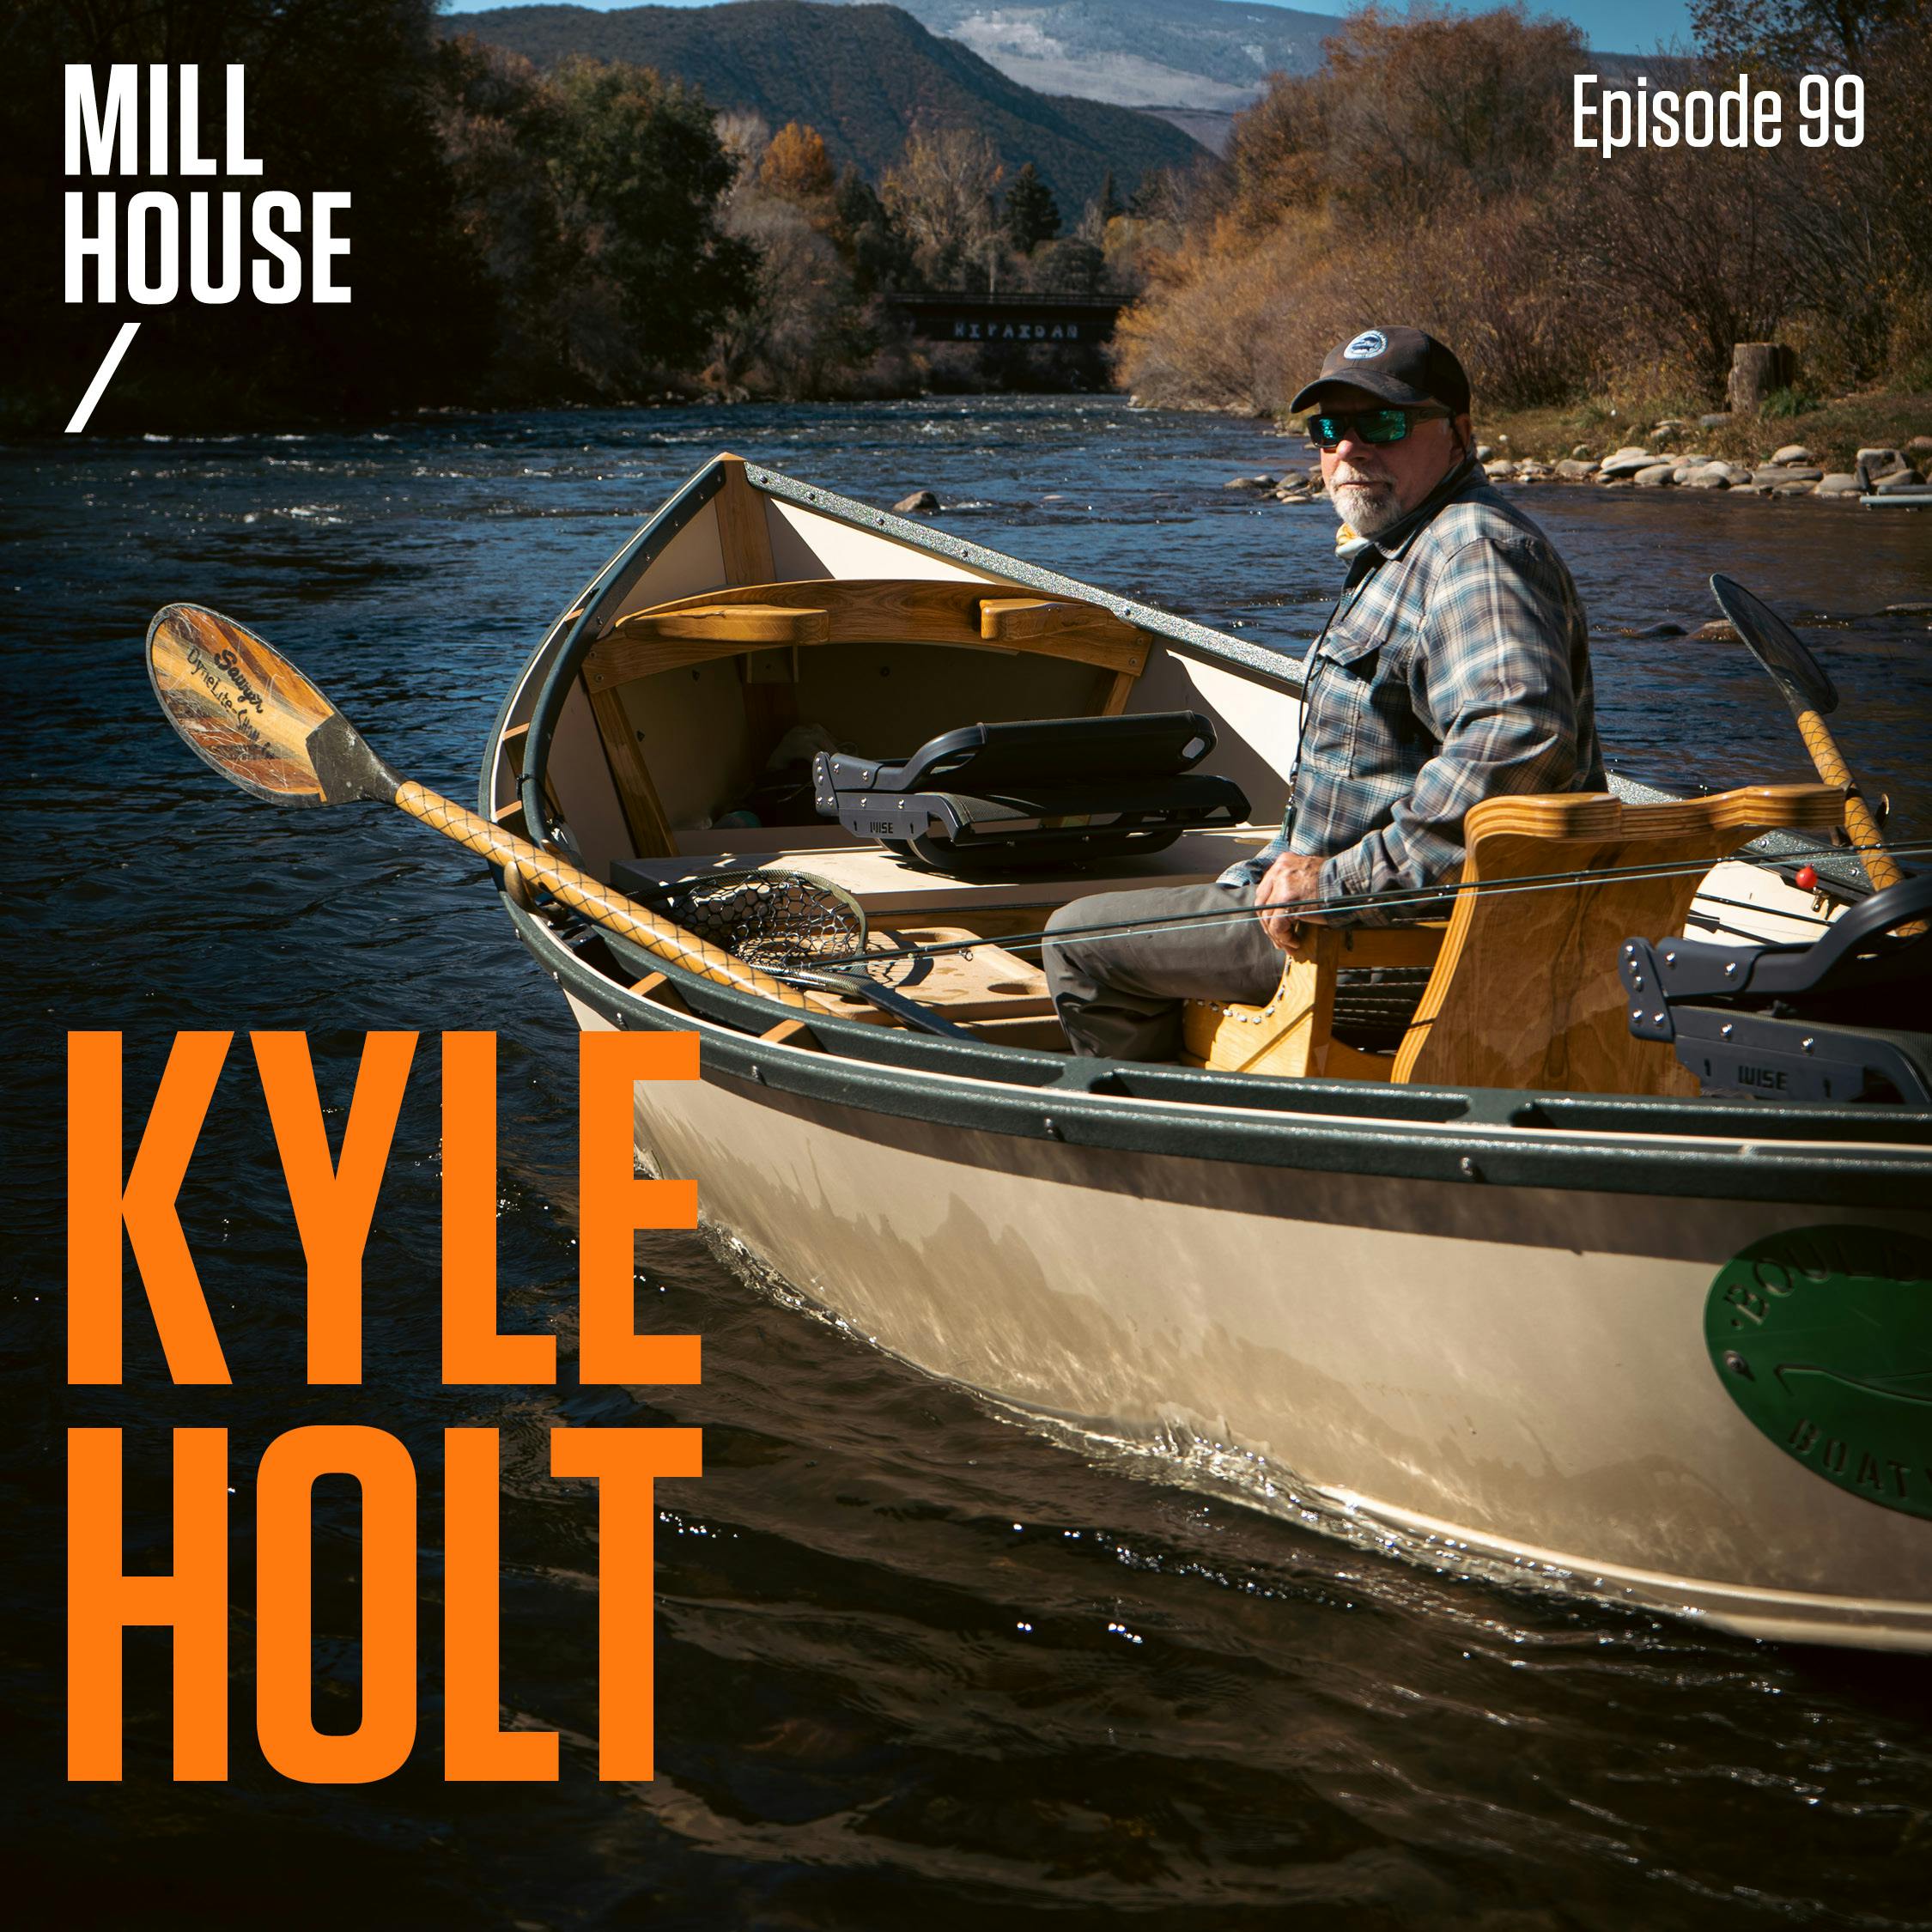 Episode 99: Kyle Holt - Trout Fishing The Roaring Fork Valley